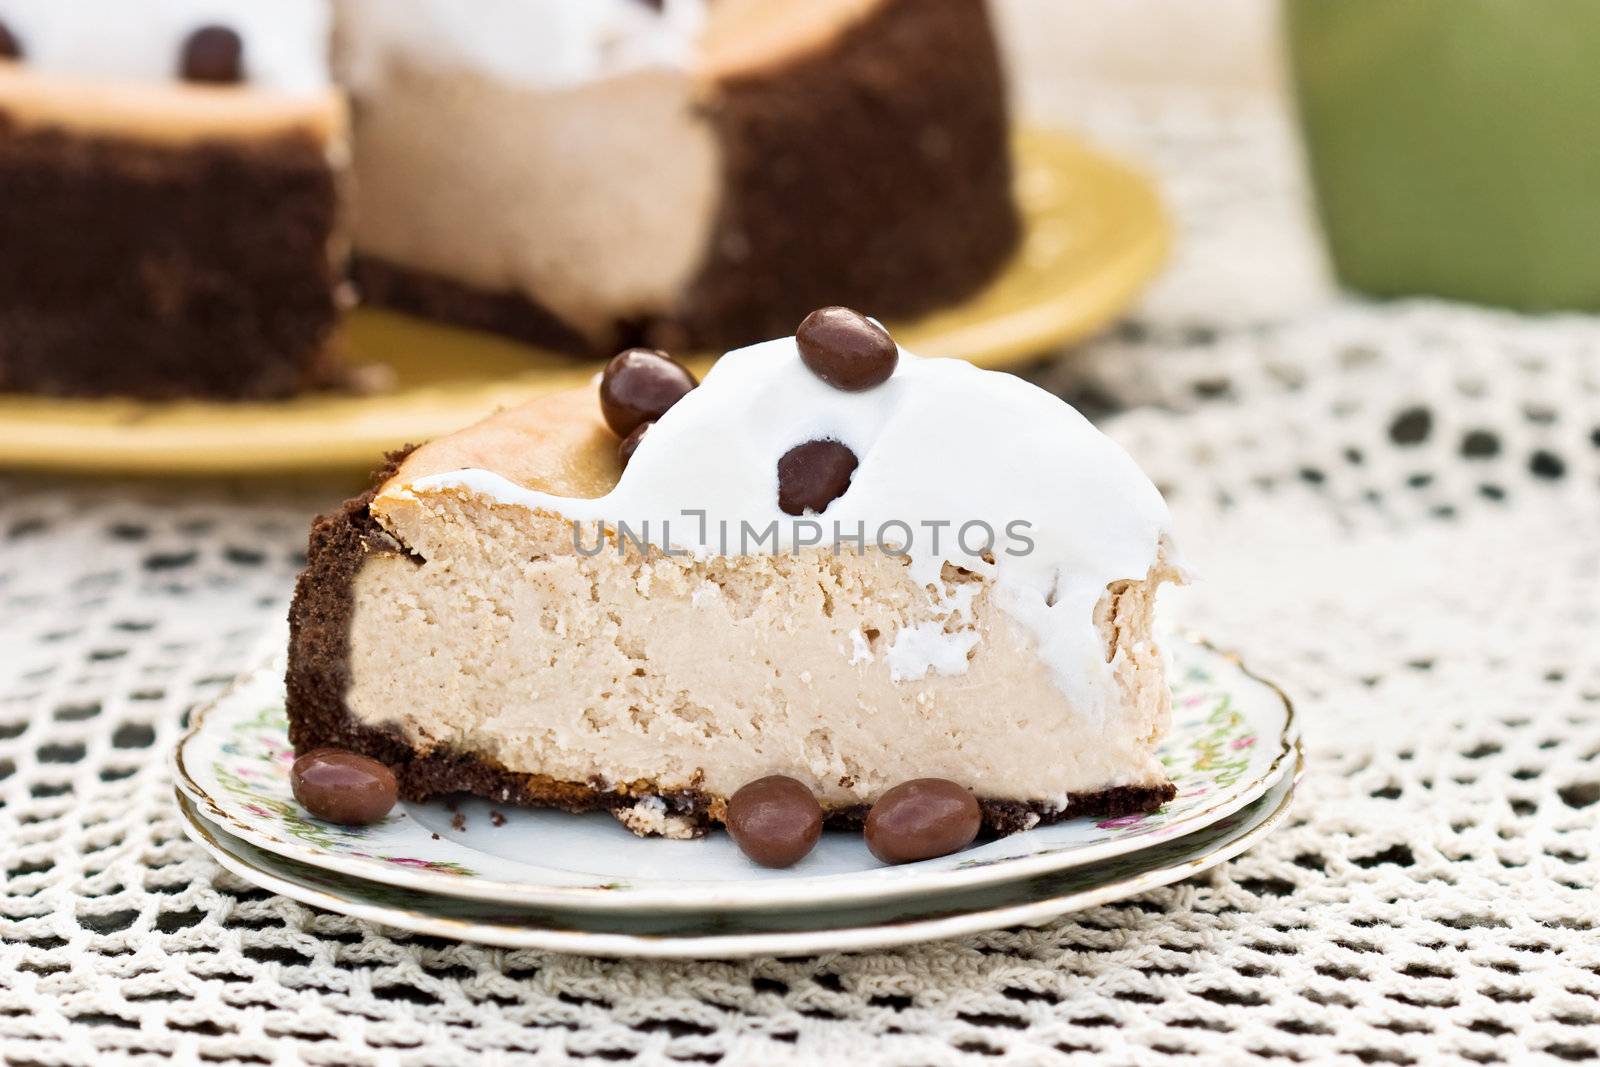 Cheesecake with Chocolate Covered Coffee Beans by StephanieFrey